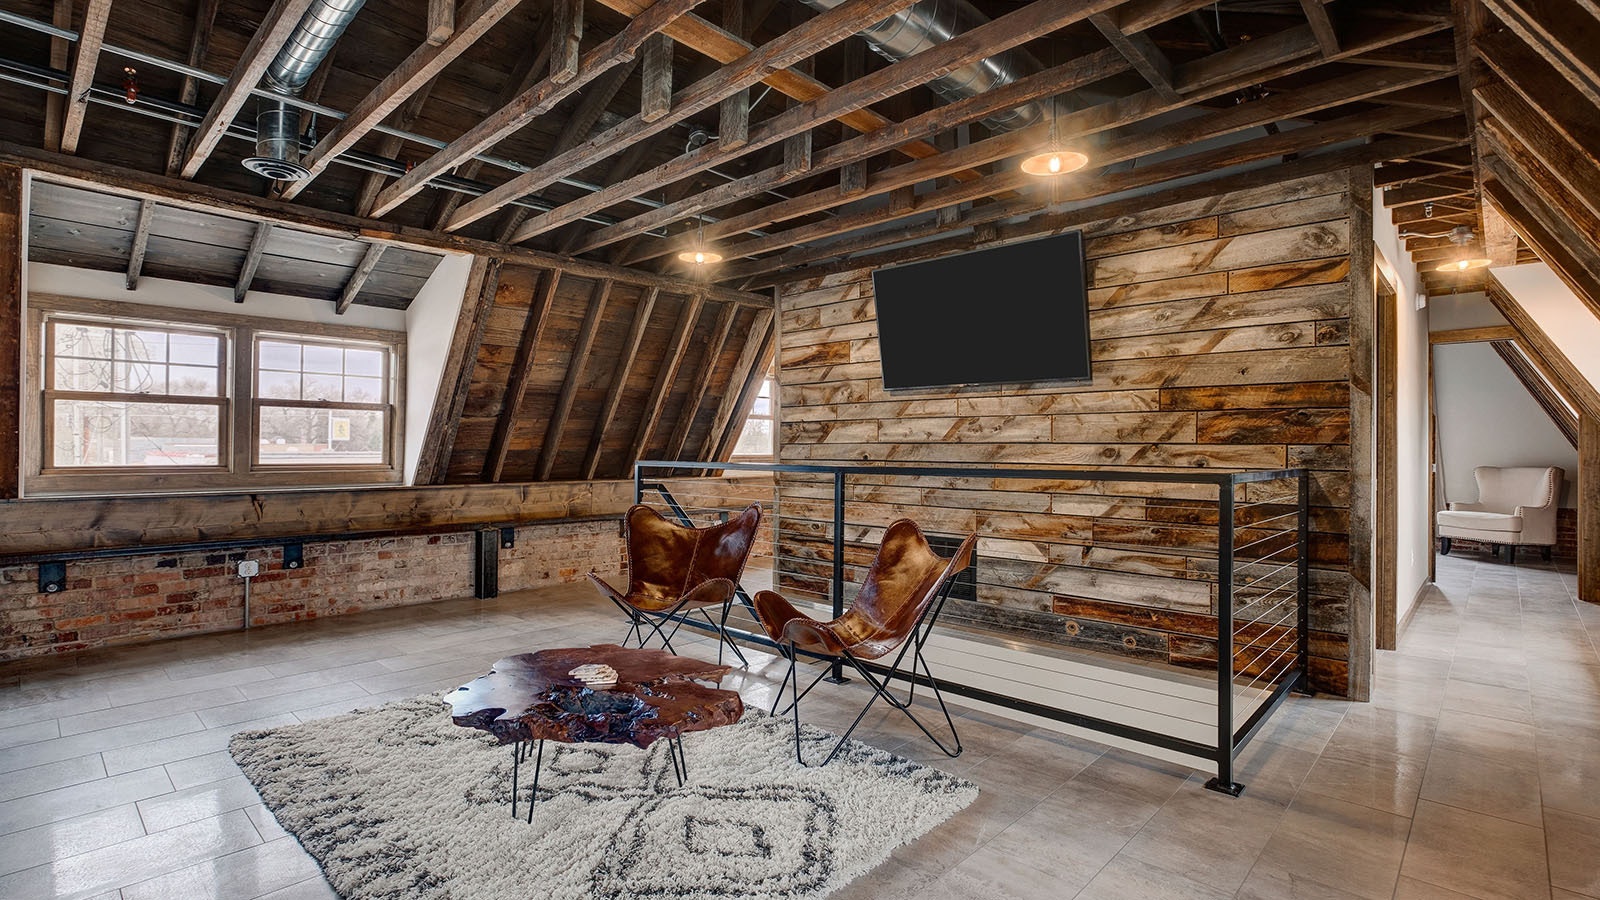 The loft of the Irwin Barn has been made into a comfortable, modern — yet still rustic — space.